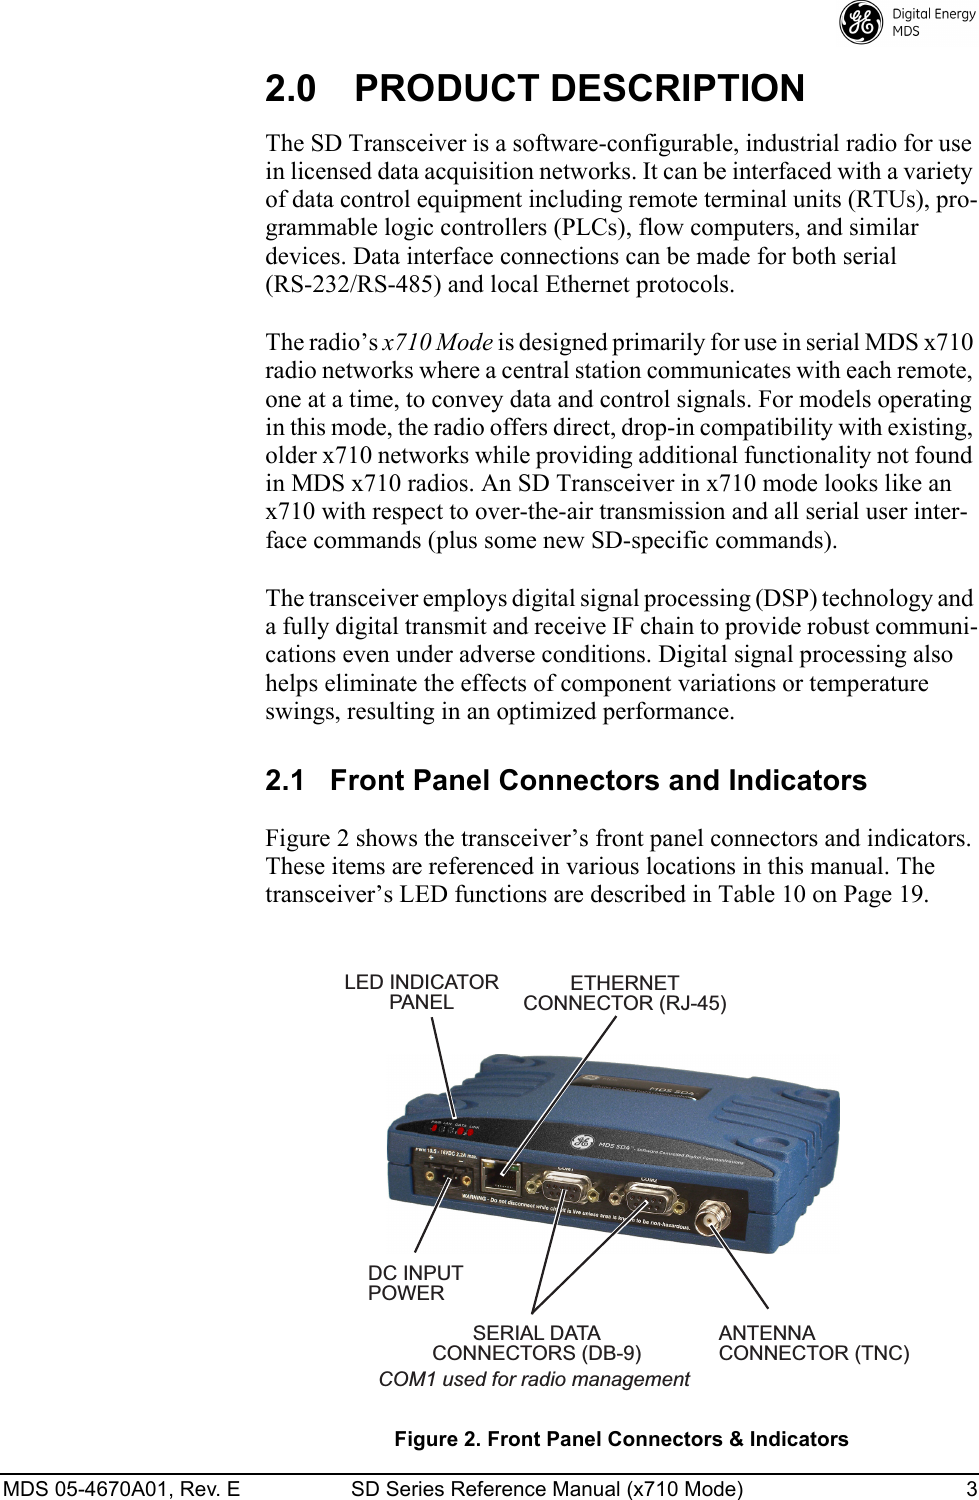 MDS 05-4670A01, Rev. E SD Series Reference Manual (x710 Mode) 3 2.0 PRODUCT DESCRIPTIONThe SD Transceiver is a software-configurable, industrial radio for use in licensed data acquisition networks. It can be interfaced with a variety of data control equipment including remote terminal units (RTUs), pro-grammable logic controllers (PLCs), flow computers, and similar devices. Data interface connections can be made for both serial (RS-232/RS-485) and local Ethernet protocols.The radio’s x710 Mode is designed primarily for use in serial MDS x710 radio networks where a central station communicates with each remote, one at a time, to convey data and control signals. For models operating in this mode, the radio offers direct, drop-in compatibility with existing, older x710 networks while providing additional functionality not found in MDS x710 radios. An SD Transceiver in x710 mode looks like an x710 with respect to over-the-air transmission and all serial user inter-face commands (plus some new SD-specific commands).The transceiver employs digital signal processing (DSP) technology and a fully digital transmit and receive IF chain to provide robust communi-cations even under adverse conditions. Digital signal processing also helps eliminate the effects of component variations or temperature swings, resulting in an optimized performance.2.1 Front Panel Connectors and IndicatorsFigure 2 shows the transceiver’s front panel connectors and indicators. These items are referenced in various locations in this manual. The transceiver’s LED functions are described in Table 10 on Page 19.Invisible place holderFigure 2. Front Panel Connectors &amp; IndicatorsANTENNACONNECTOR (TNC)SERIAL DATACONNECTORS (DB-9)DC INPUTPOWERLED INDICATORPANELETHERNETCONNECTOR (RJ-45)COM1 used for radio management